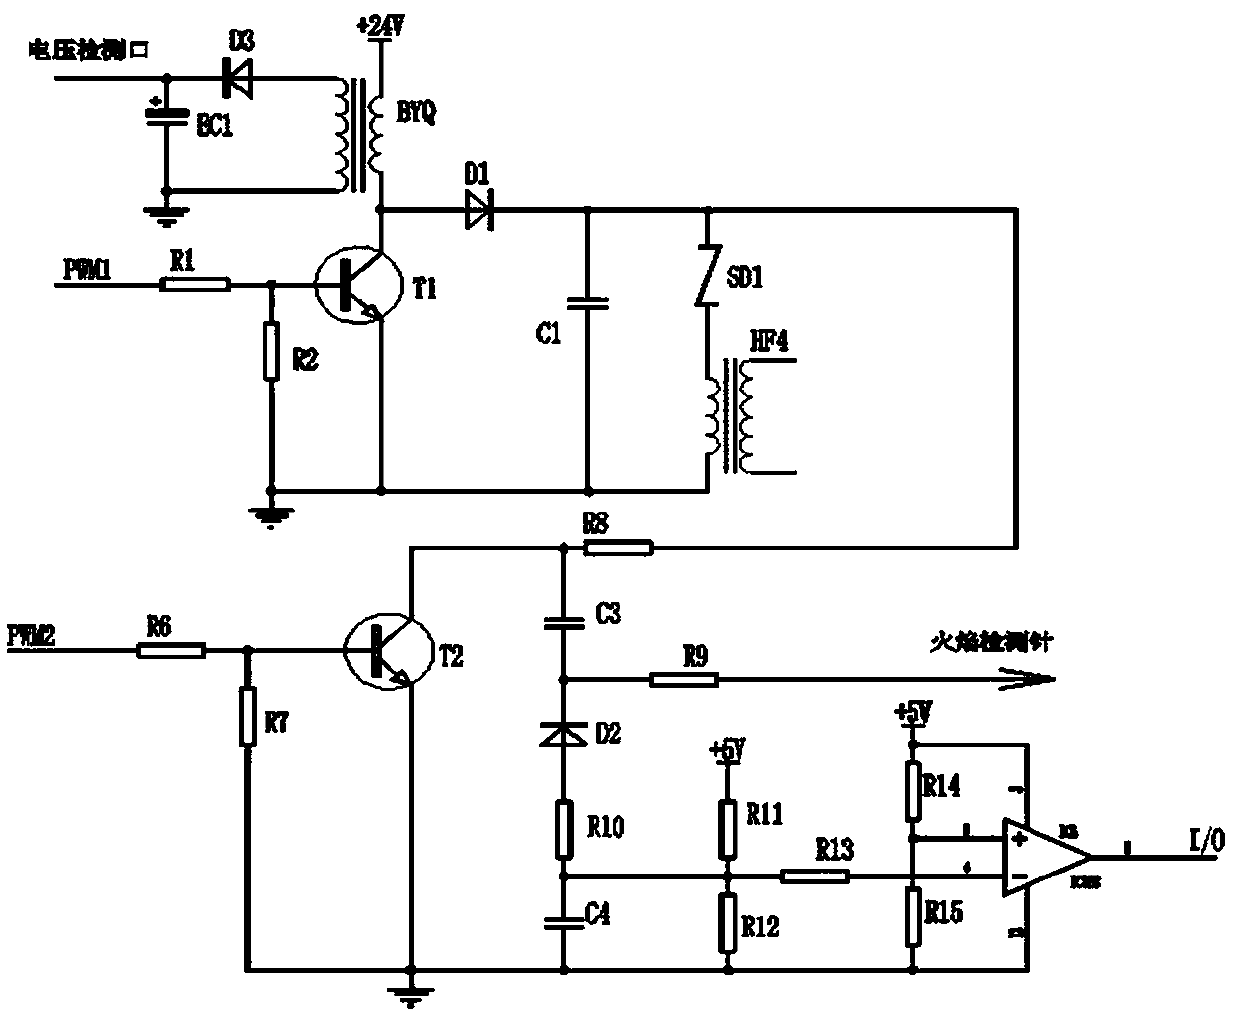 Ignition and detection circuit and gas wall-hung boiler based on boost principle